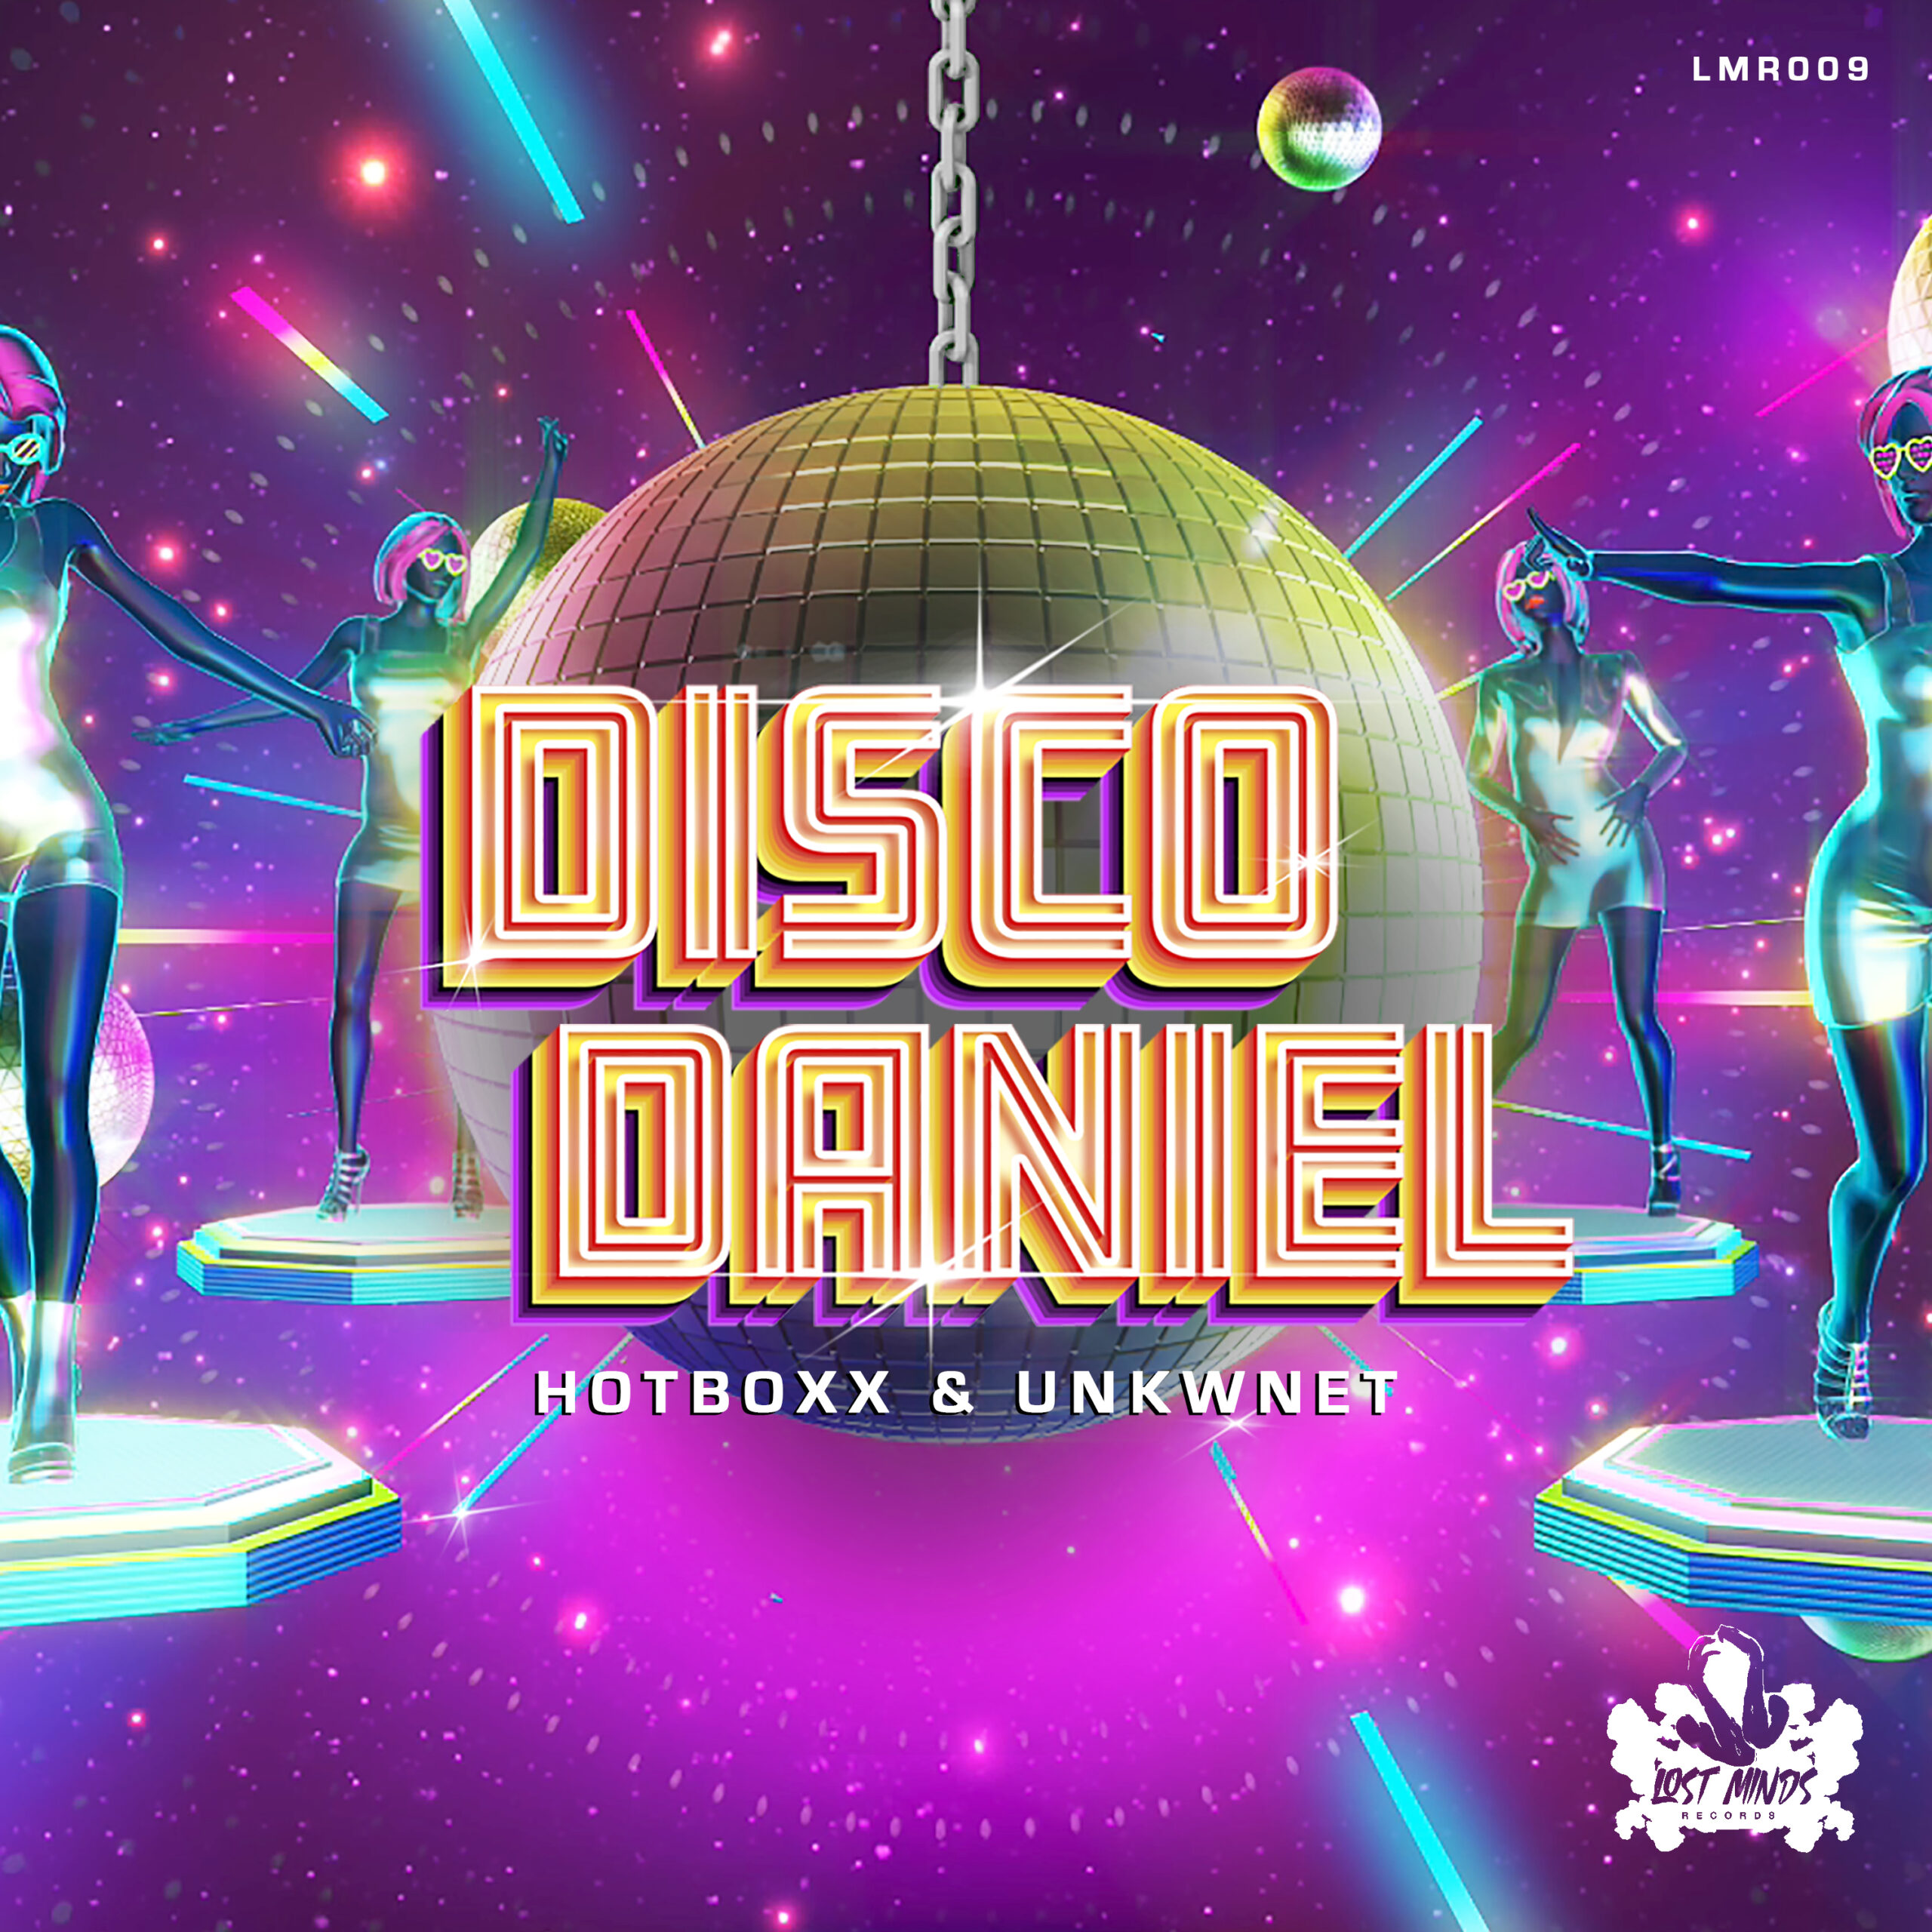 Hotboxx and Unkwnet Hit Back with ‘Disco Daniel'